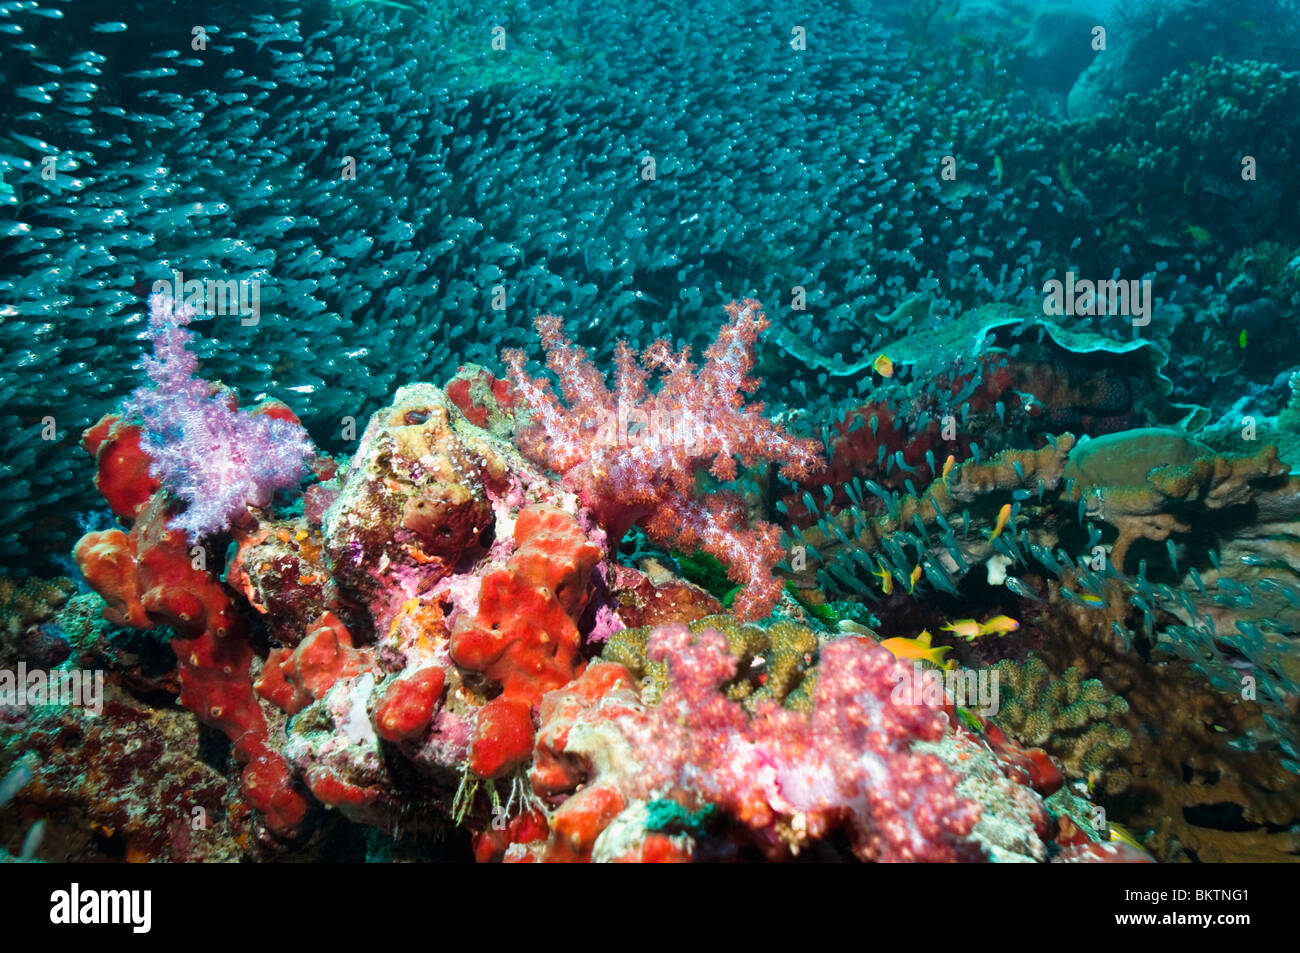 Soft coral (Dendronephthya sp.) on coral reef with a school of cardinalfish in background. Andaman Sea, Thailand. Stock Photo